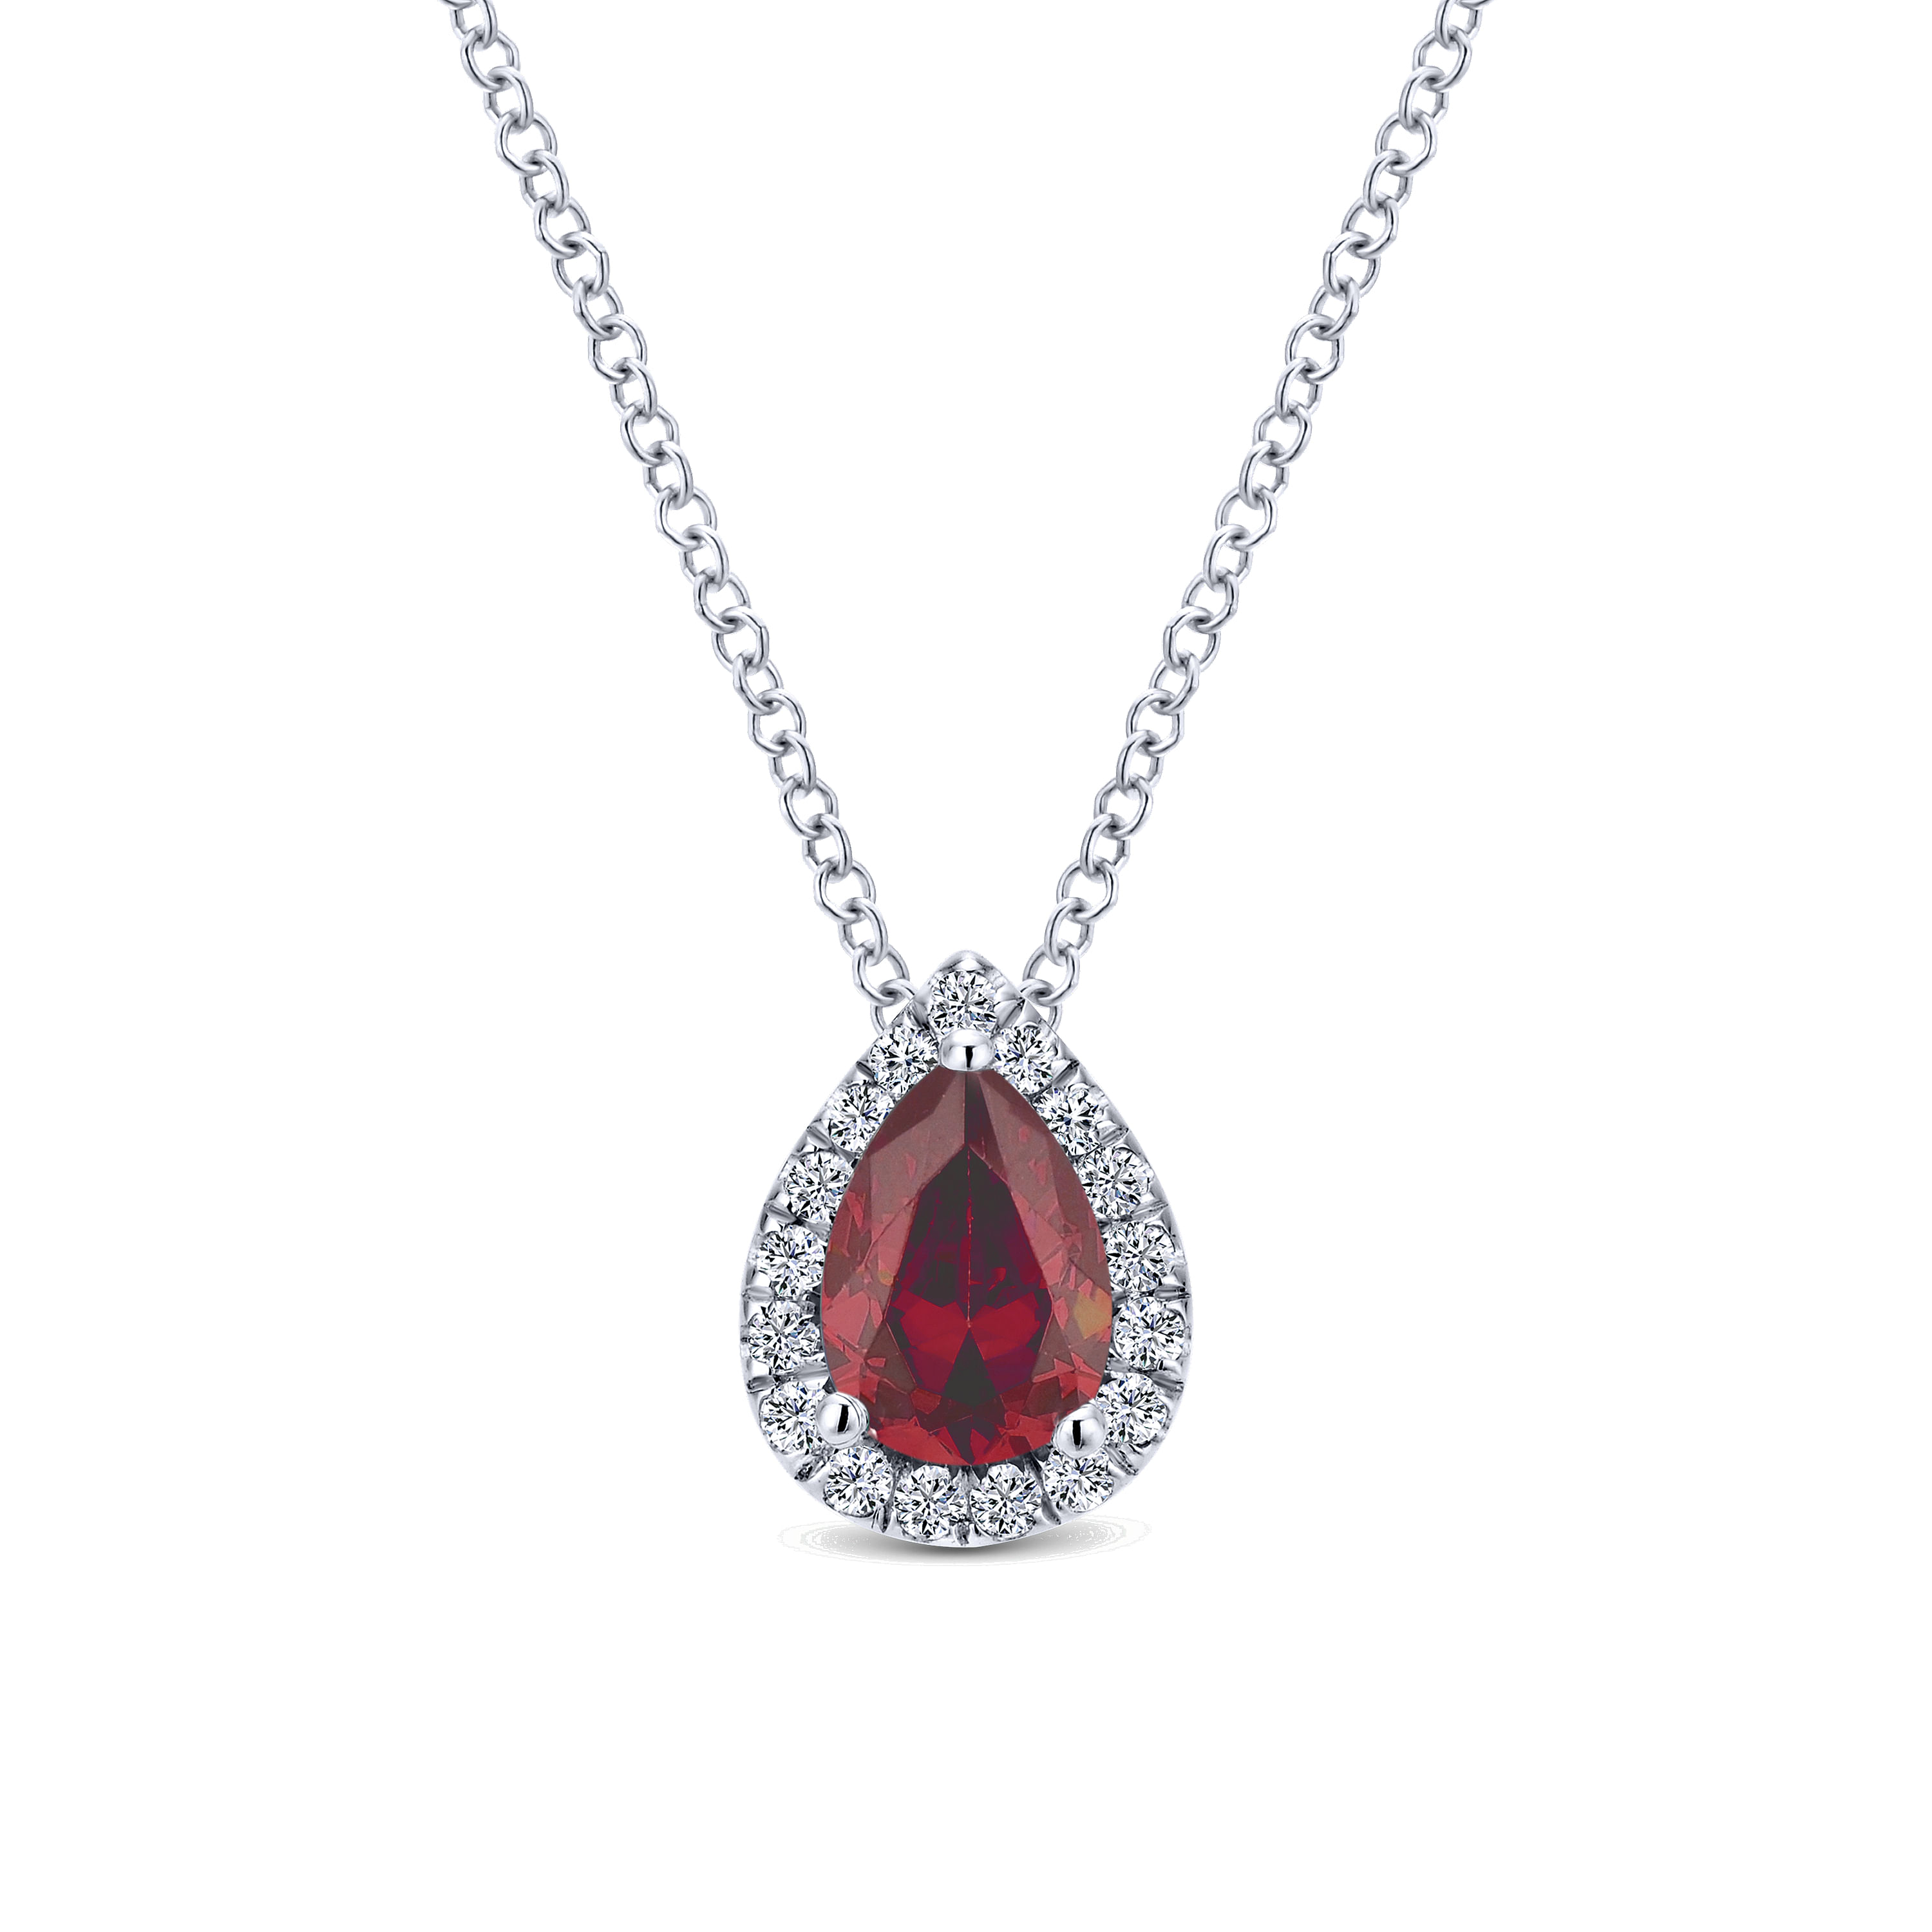 18 inch 14K White Gold Pear Shaped Ruby and Diamond Halo Pendant Necklace